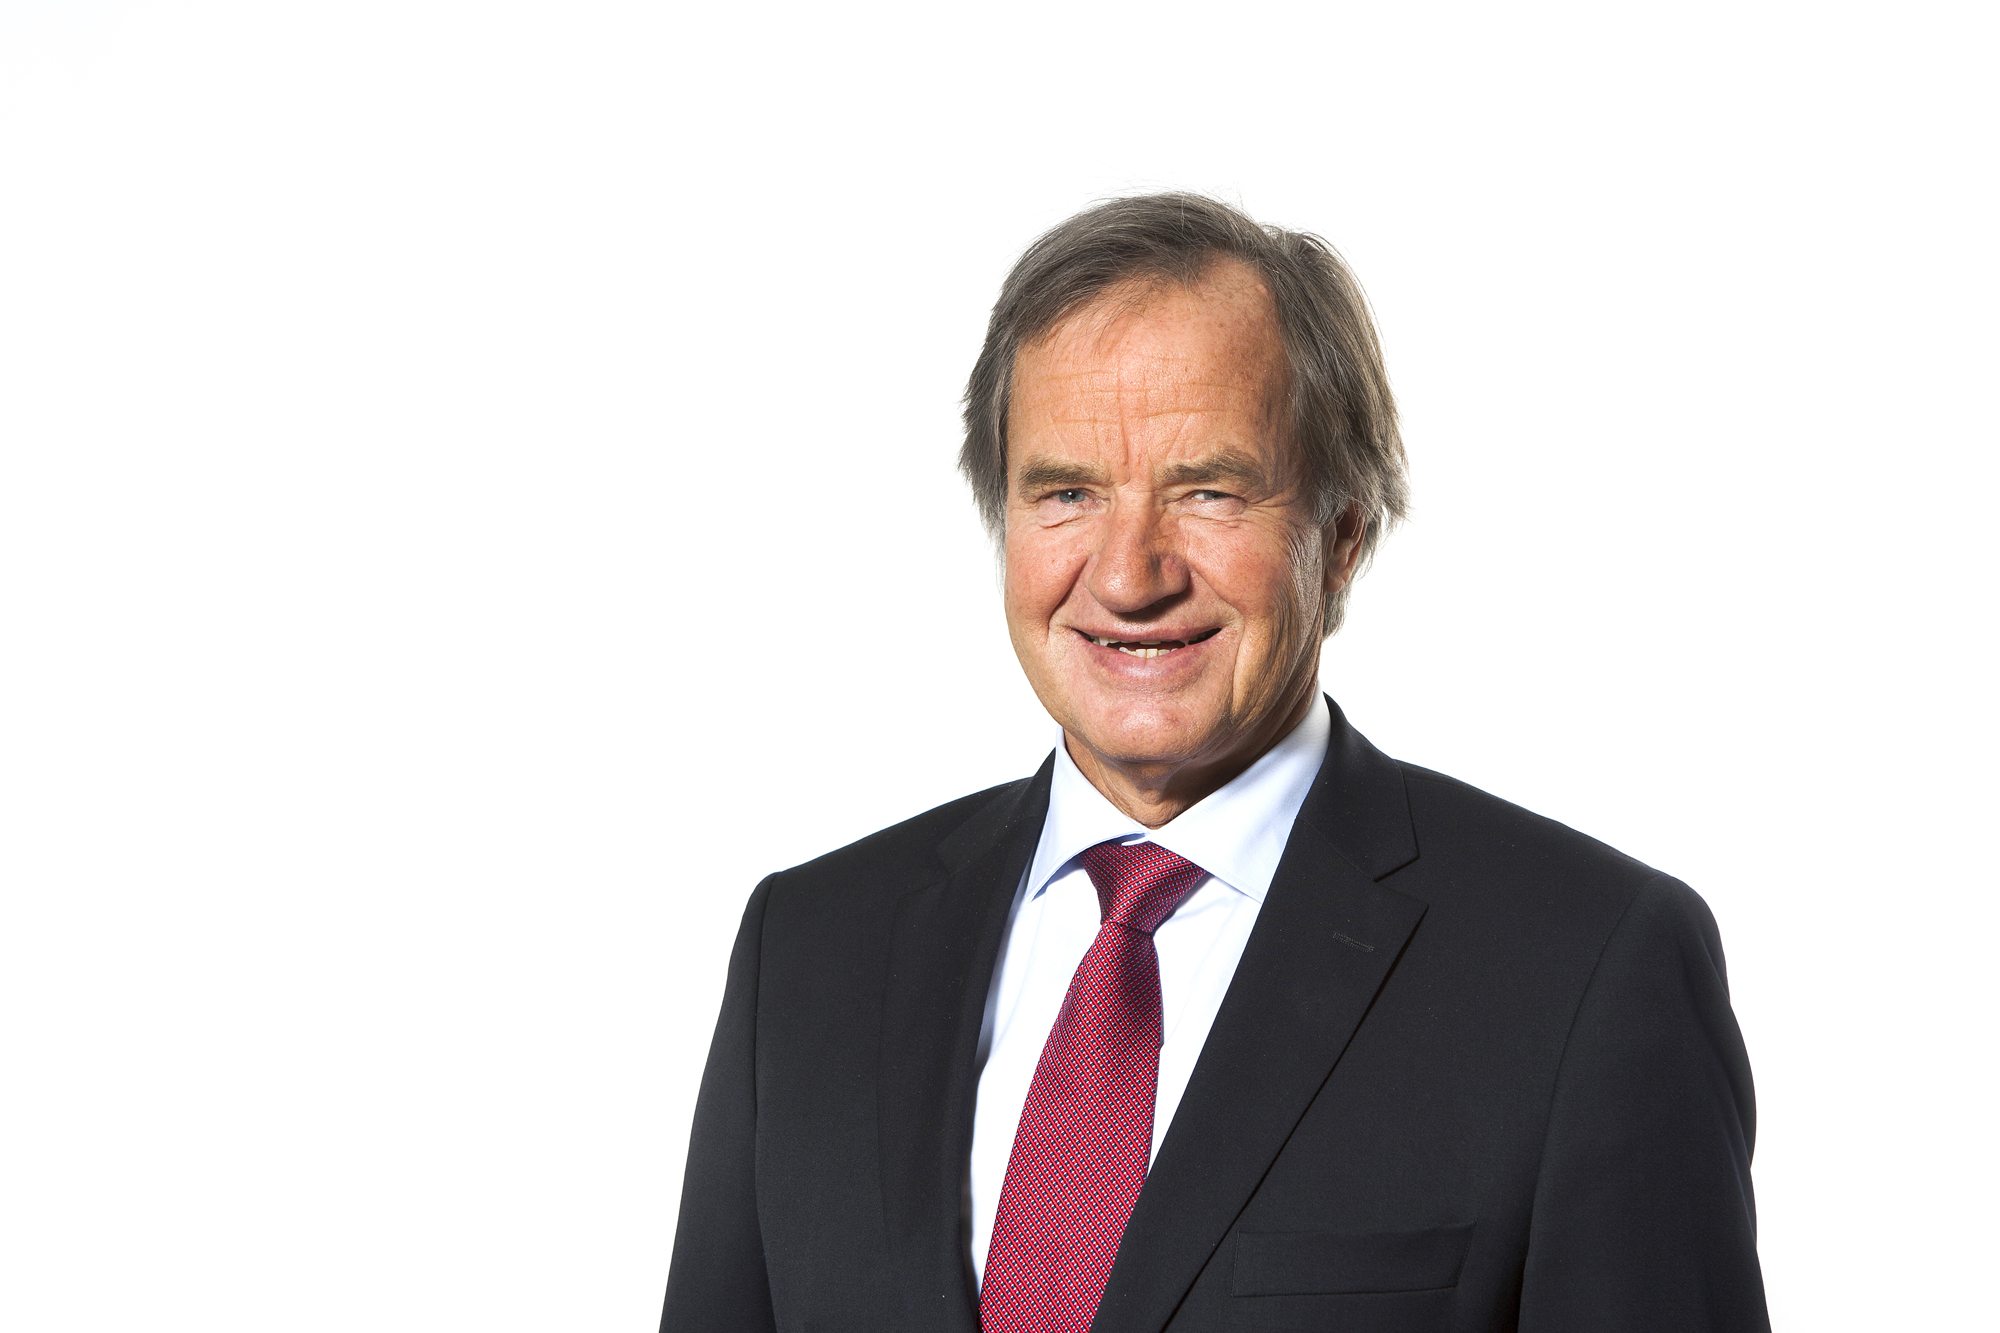 Norwegian Air CEO Bjørn Kjos is planning a major global expansion for his low-cost airline.